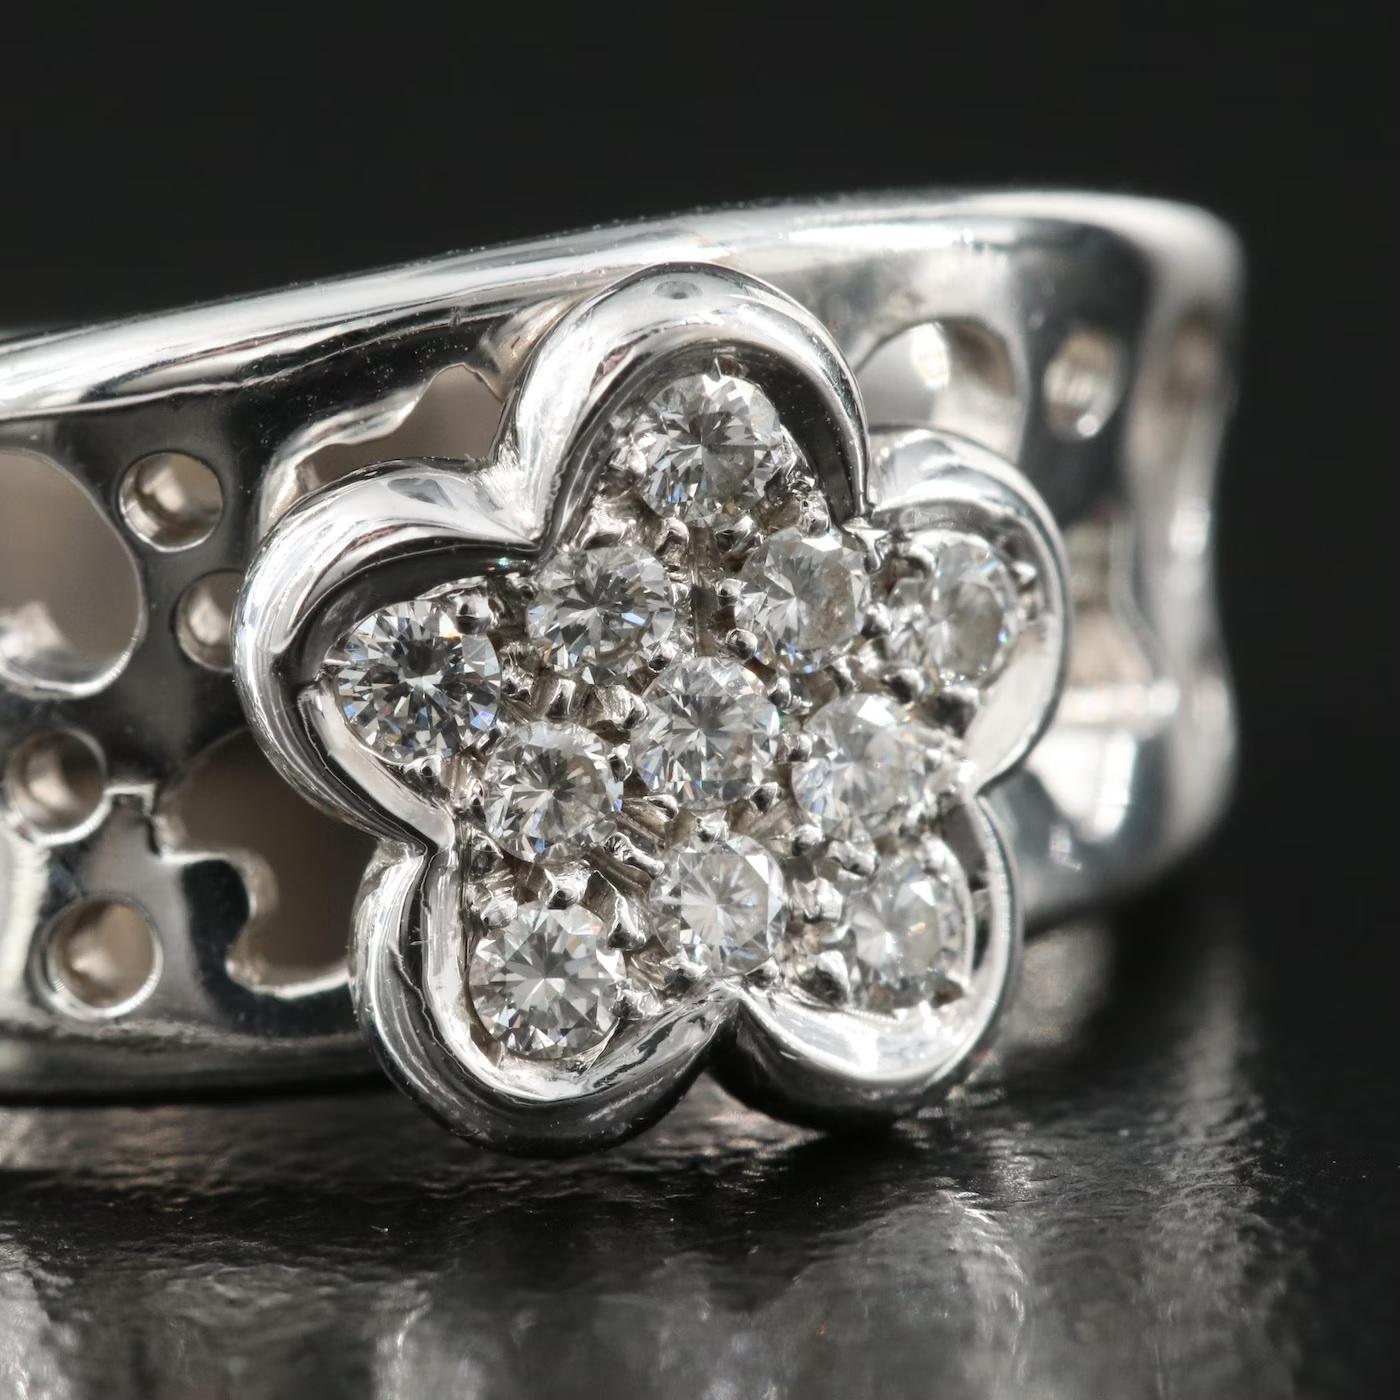 PASQUALE BRUNI - ITALY designer ring, stamped and hallmarked 

Hallmarks: ☆ 2211 AL 18KT P.B.

New with Tags, Price on Tag $9500

Amazing design, Flower - floral collection 

Natural Diamond, White sparkly diamond 

18K solid white gold, stamped